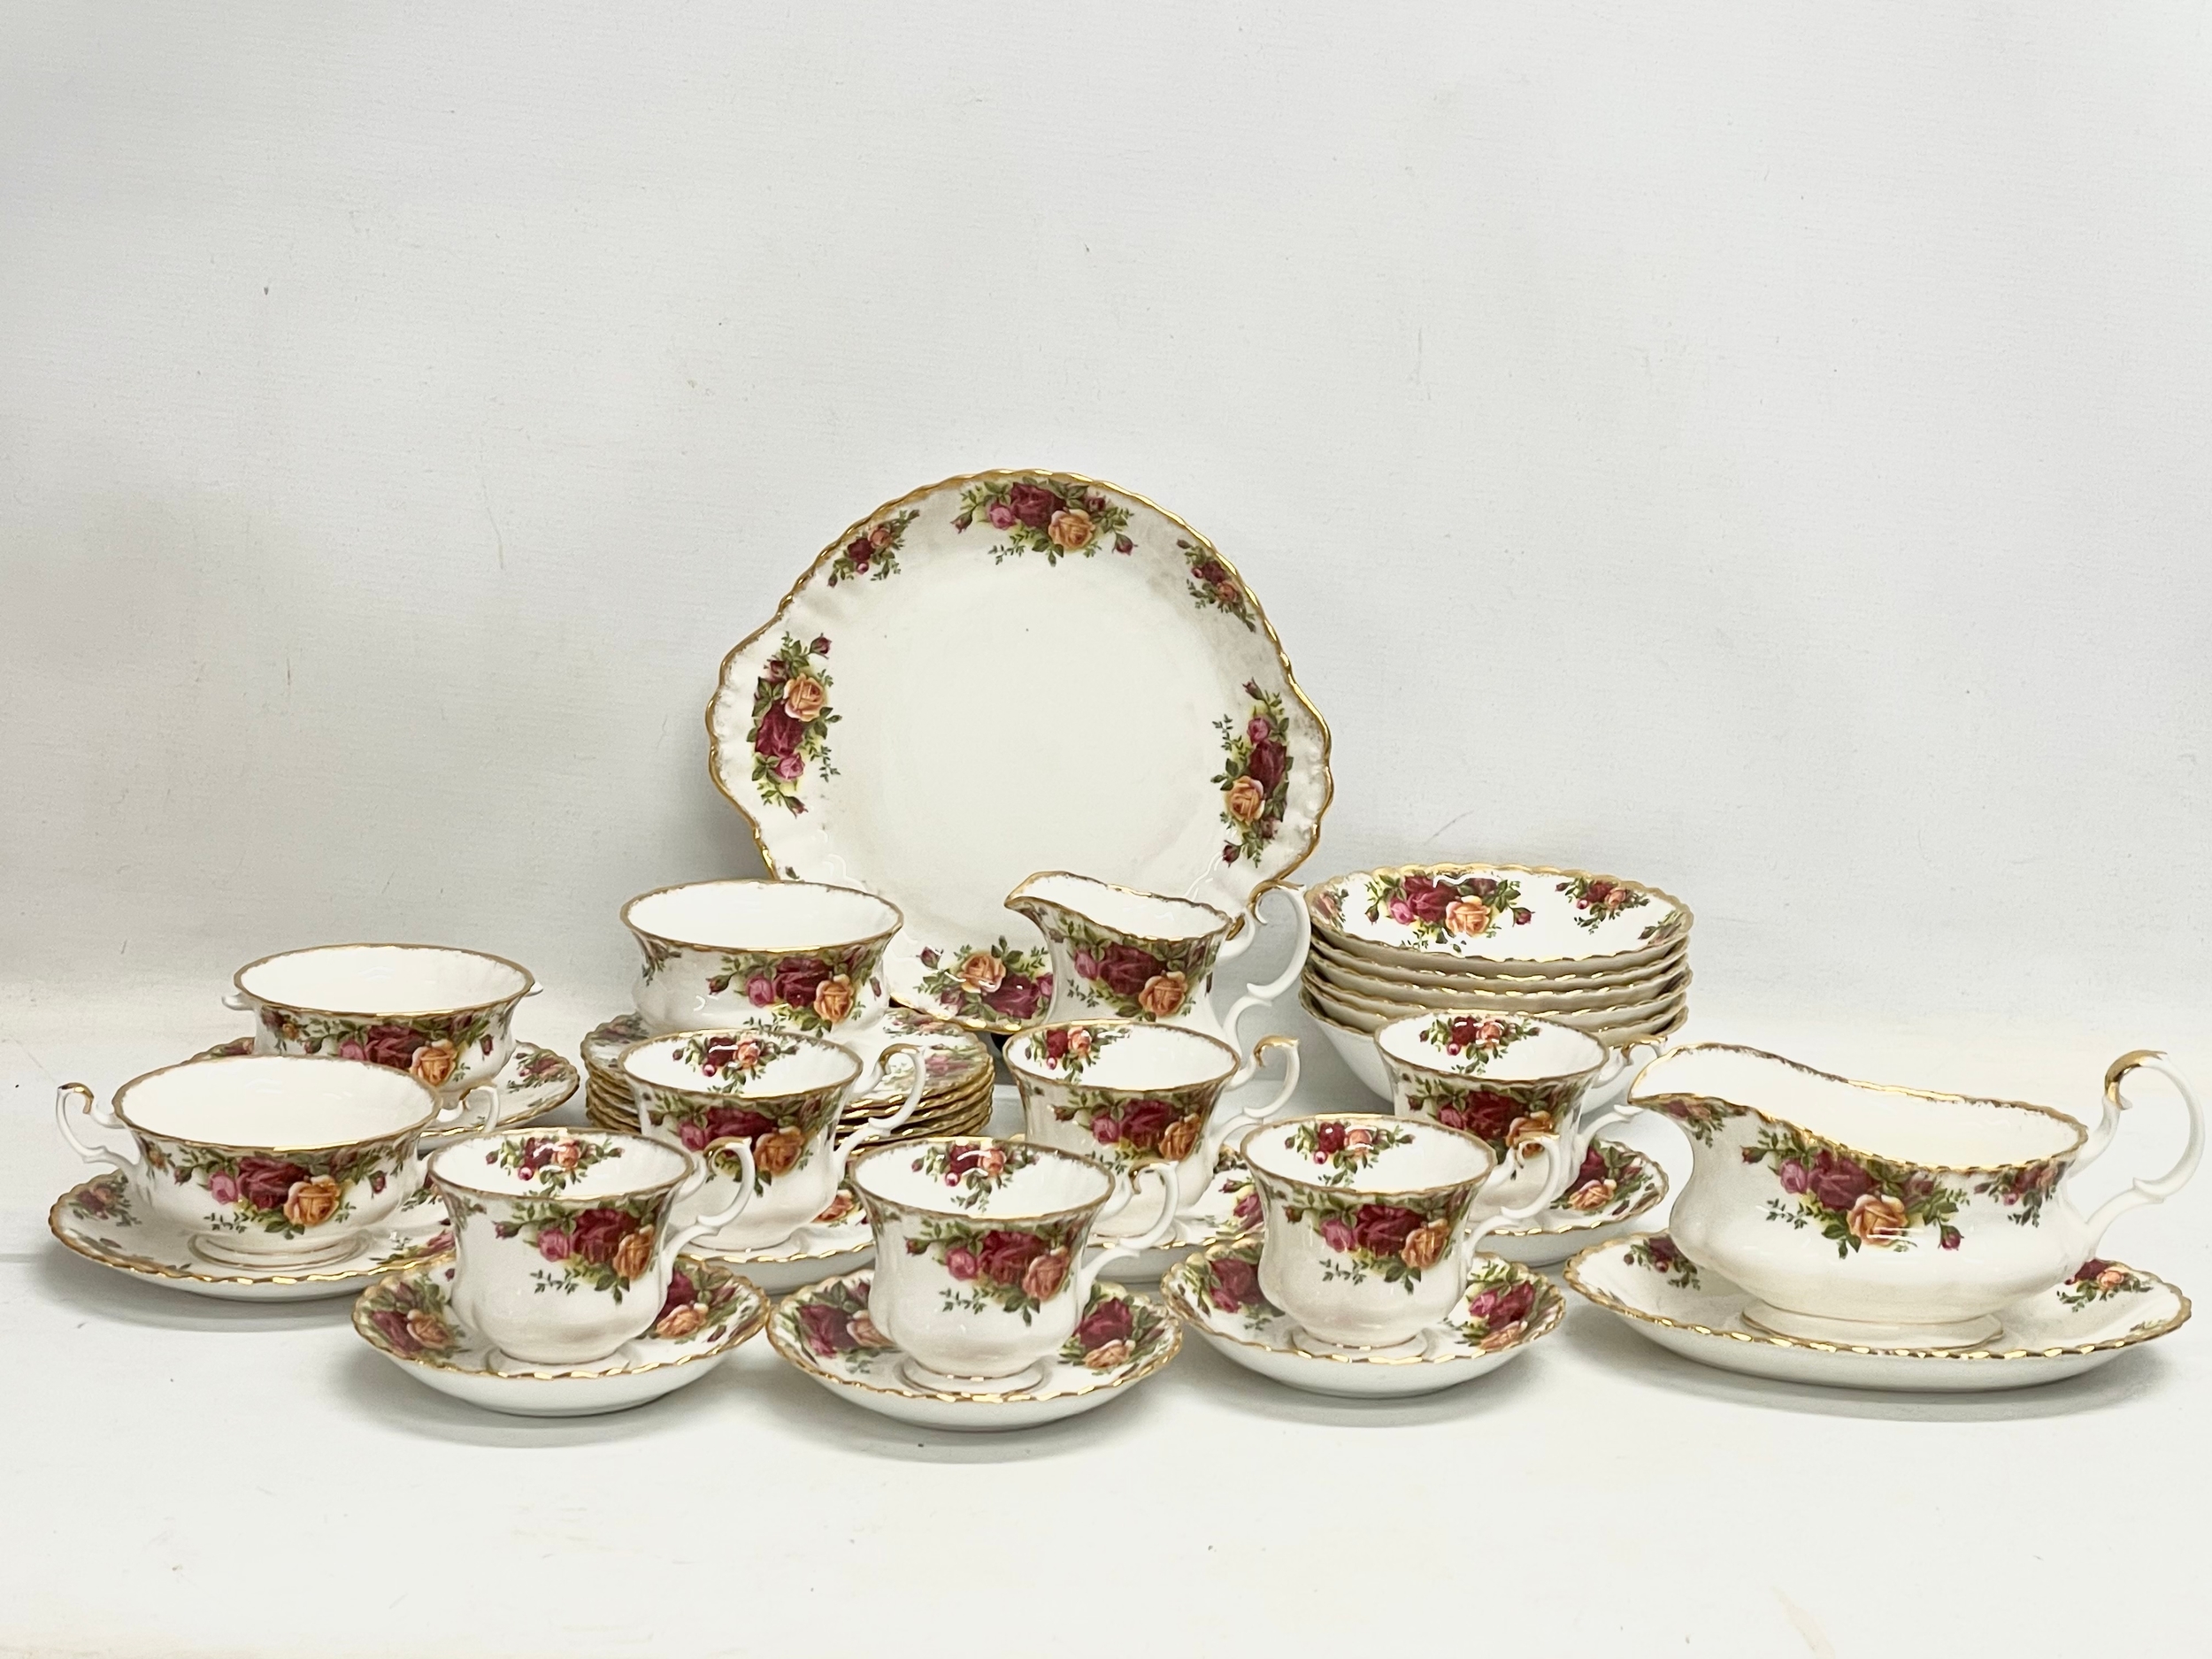 33 pieces of Royal Albert ‘Old Country Roses’ cake plate, 6 soup bowls, gravy boat and saucer.